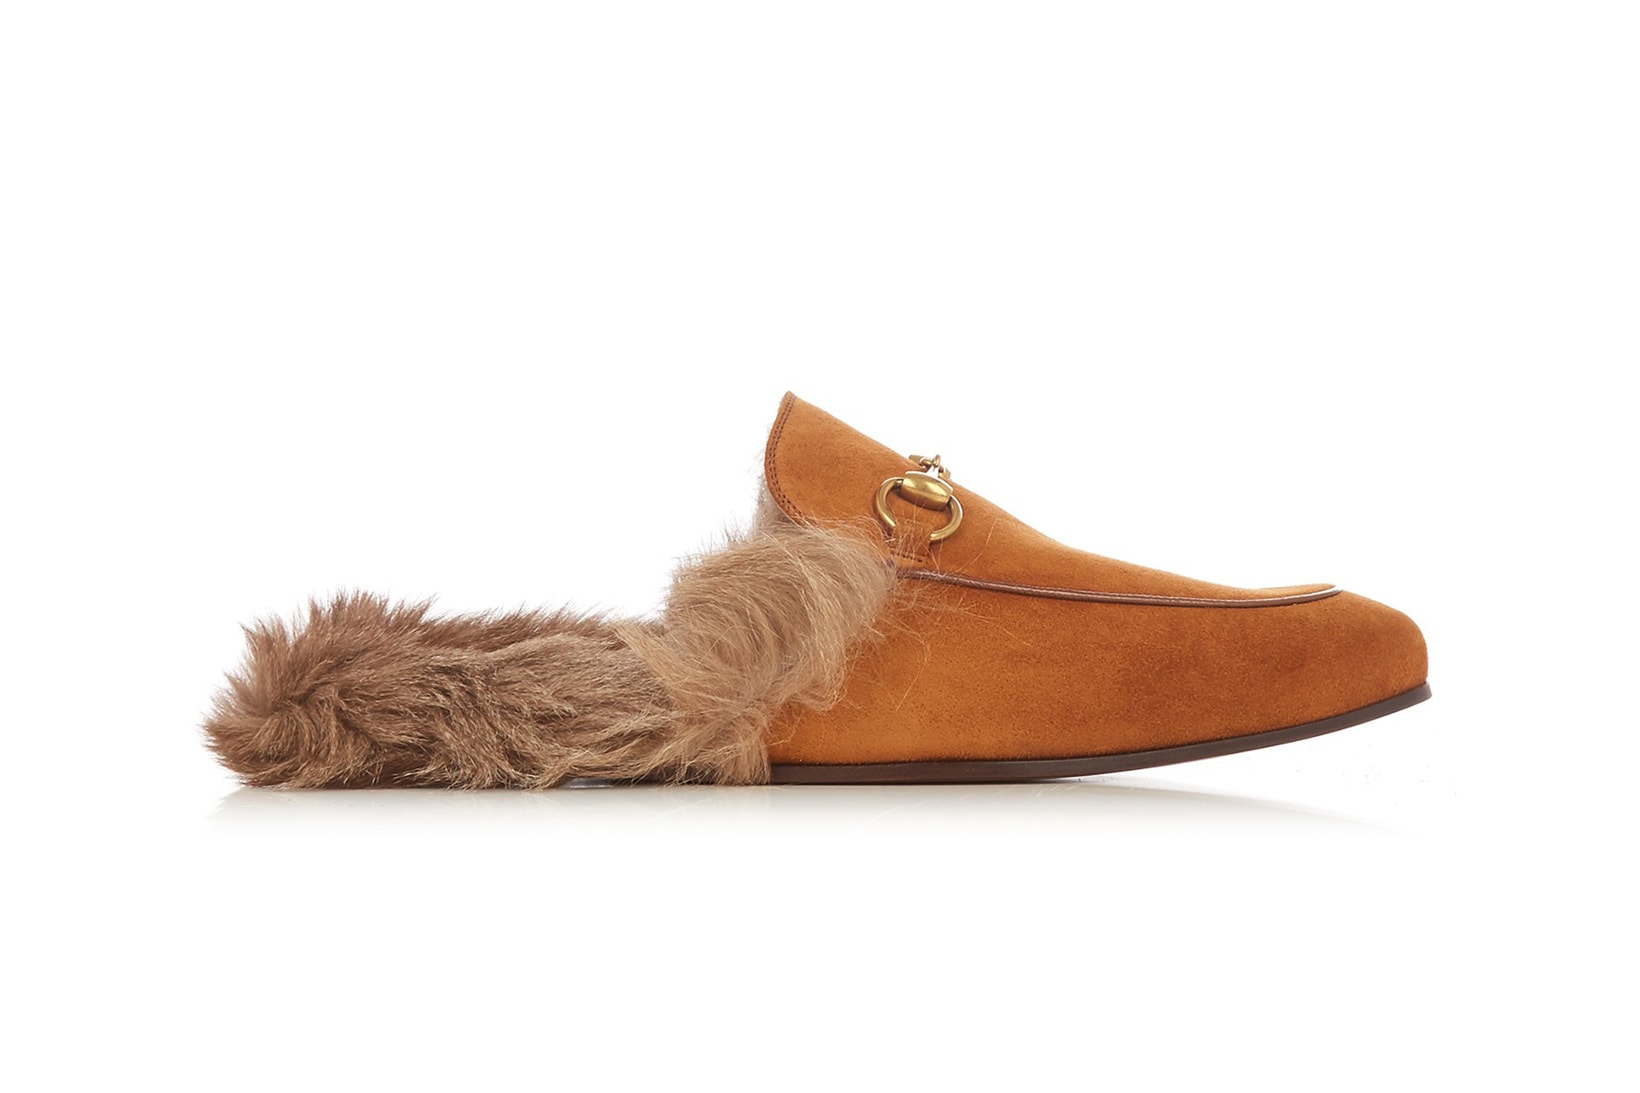 Gucci Princetown Loafer Tan Suede Leather